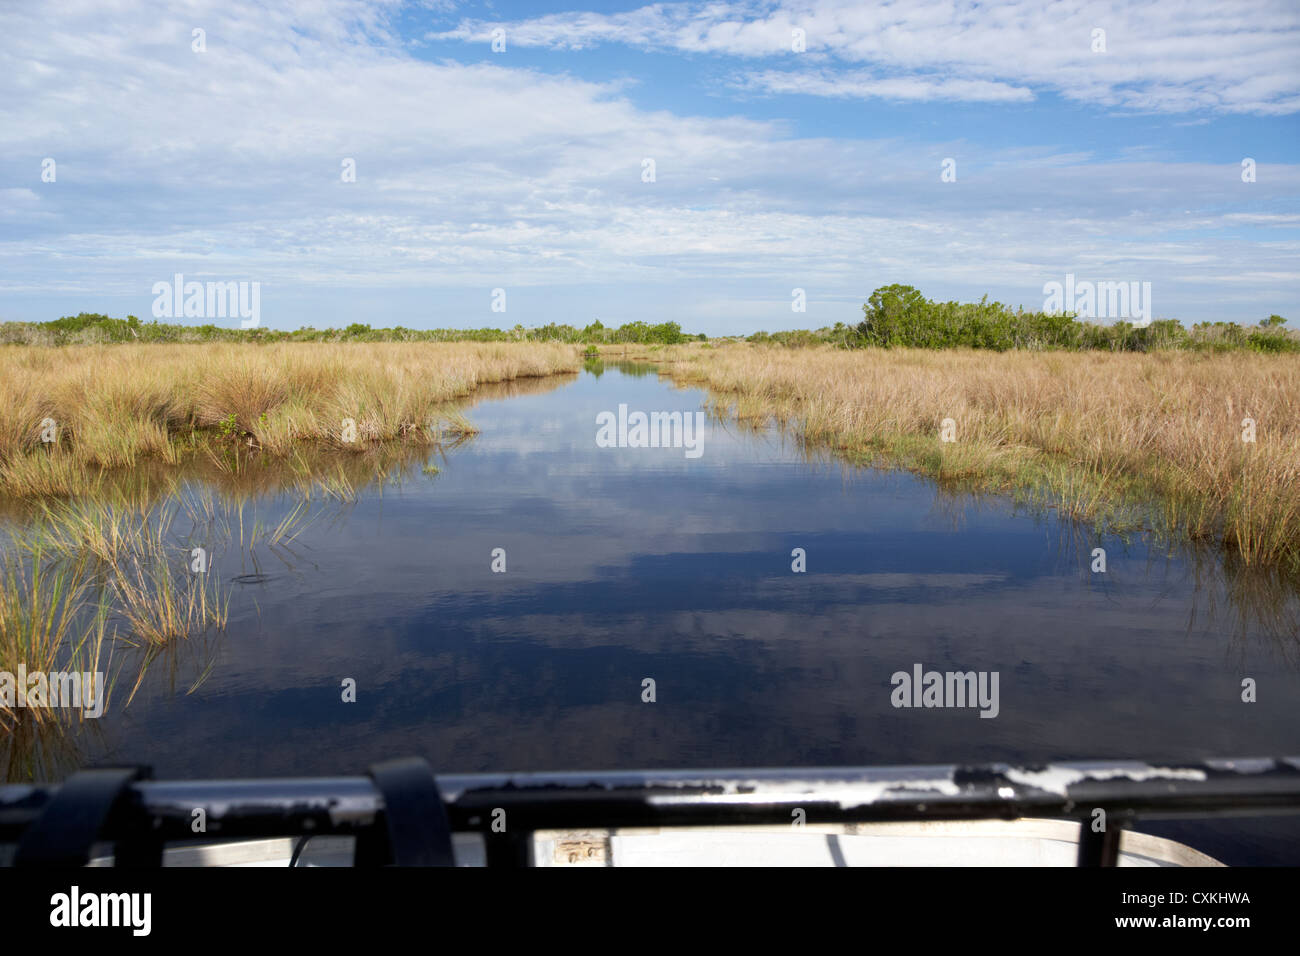 on board an airboat ride in the grasslands everglades city florida everglades usa Stock Photo